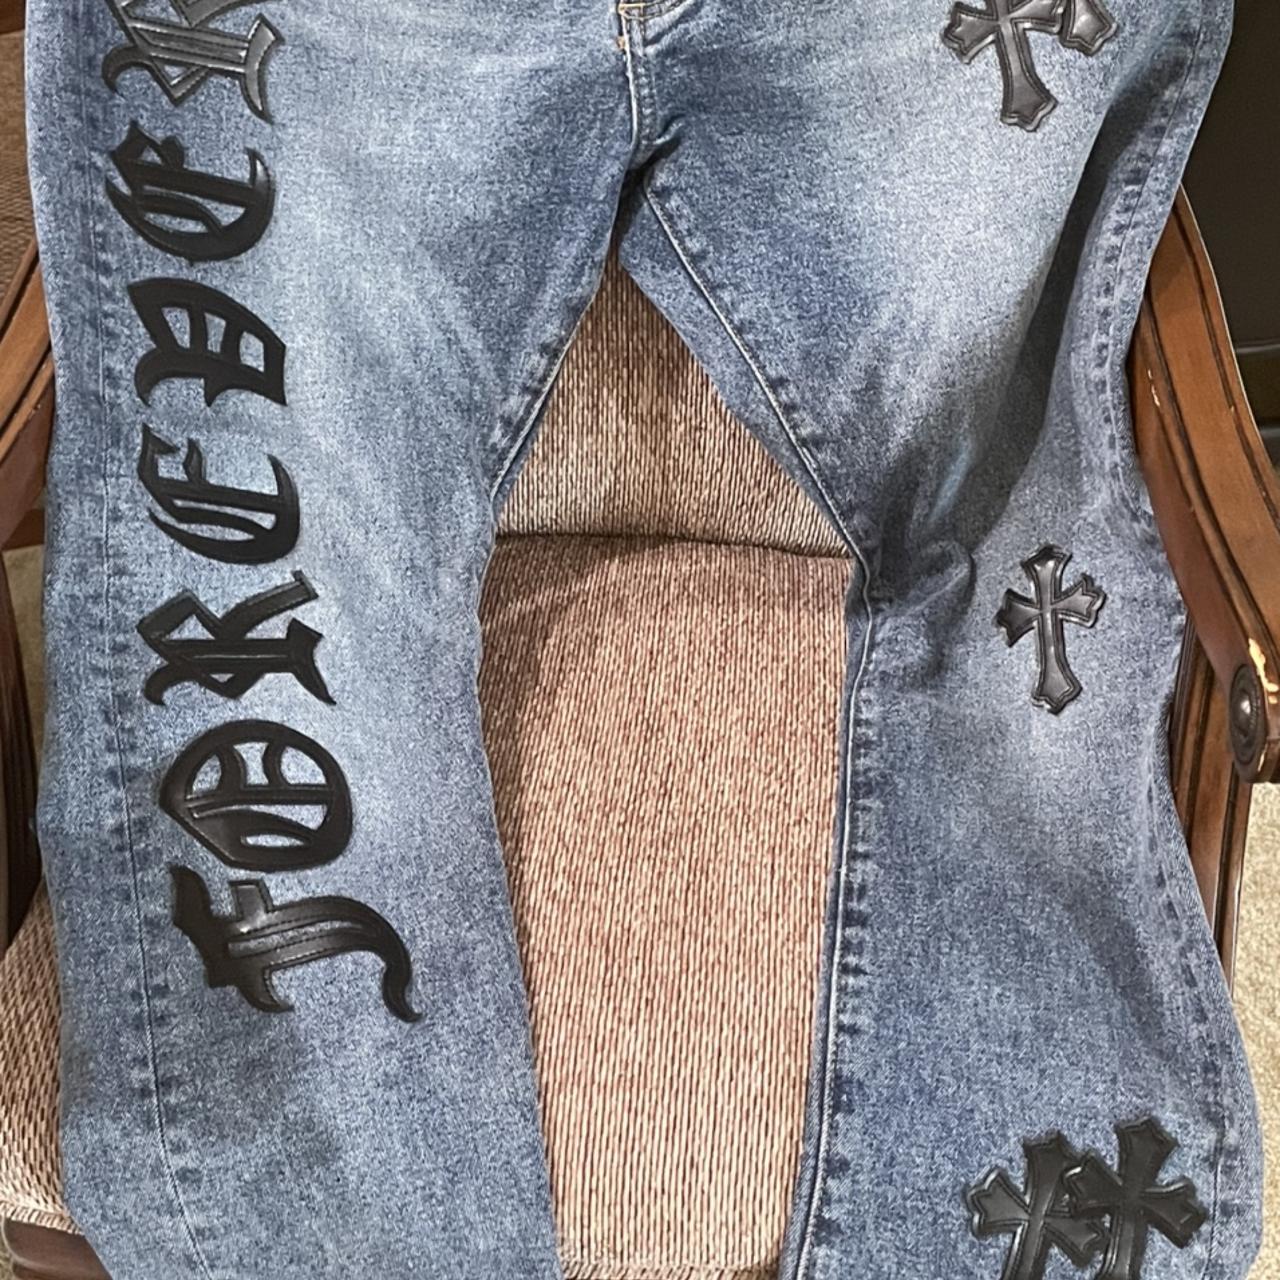 VNDS Chrome Hearts Jeans, can provide more photos